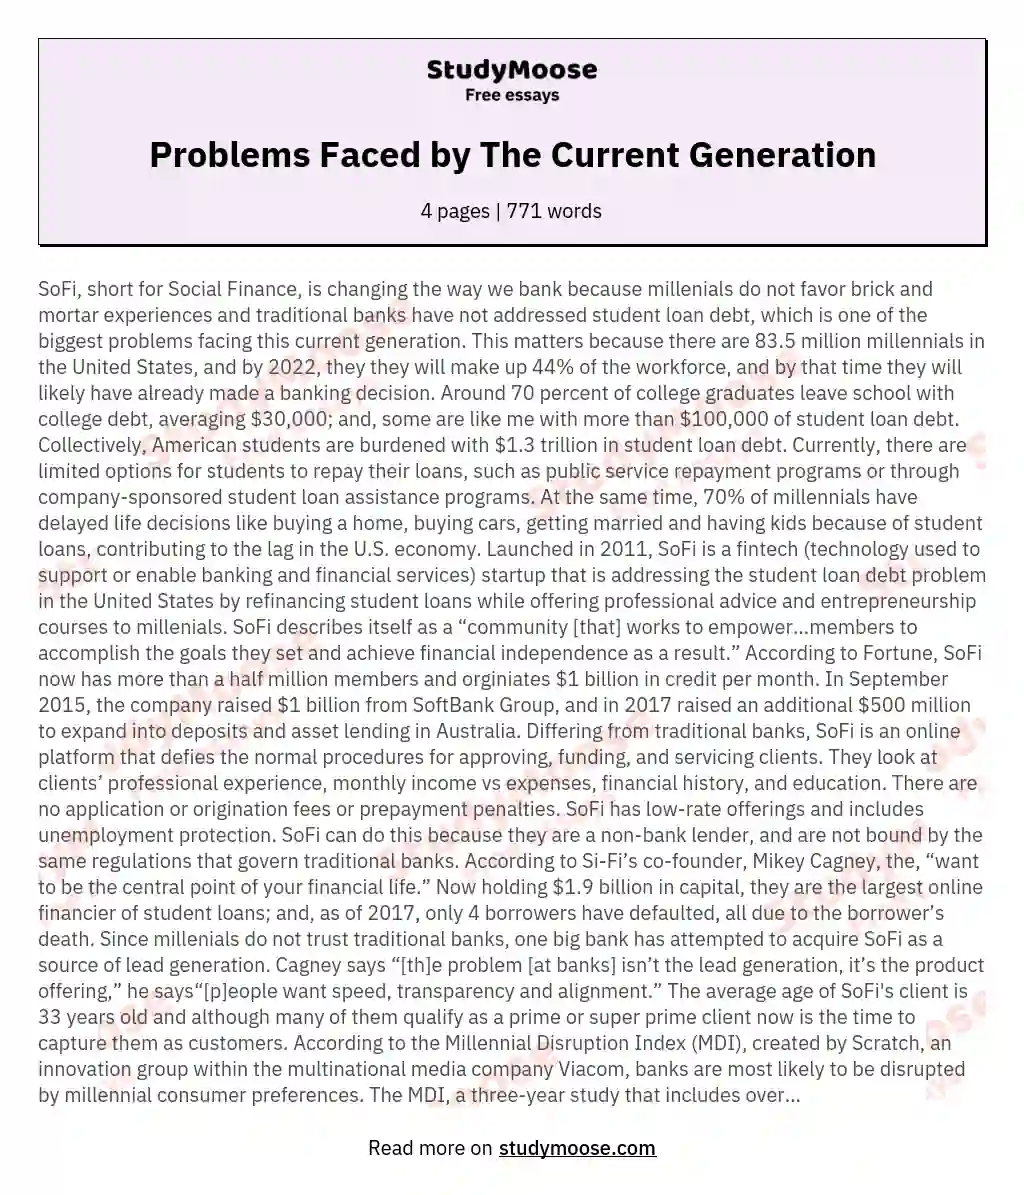 Problems Faced by The Current Generation essay